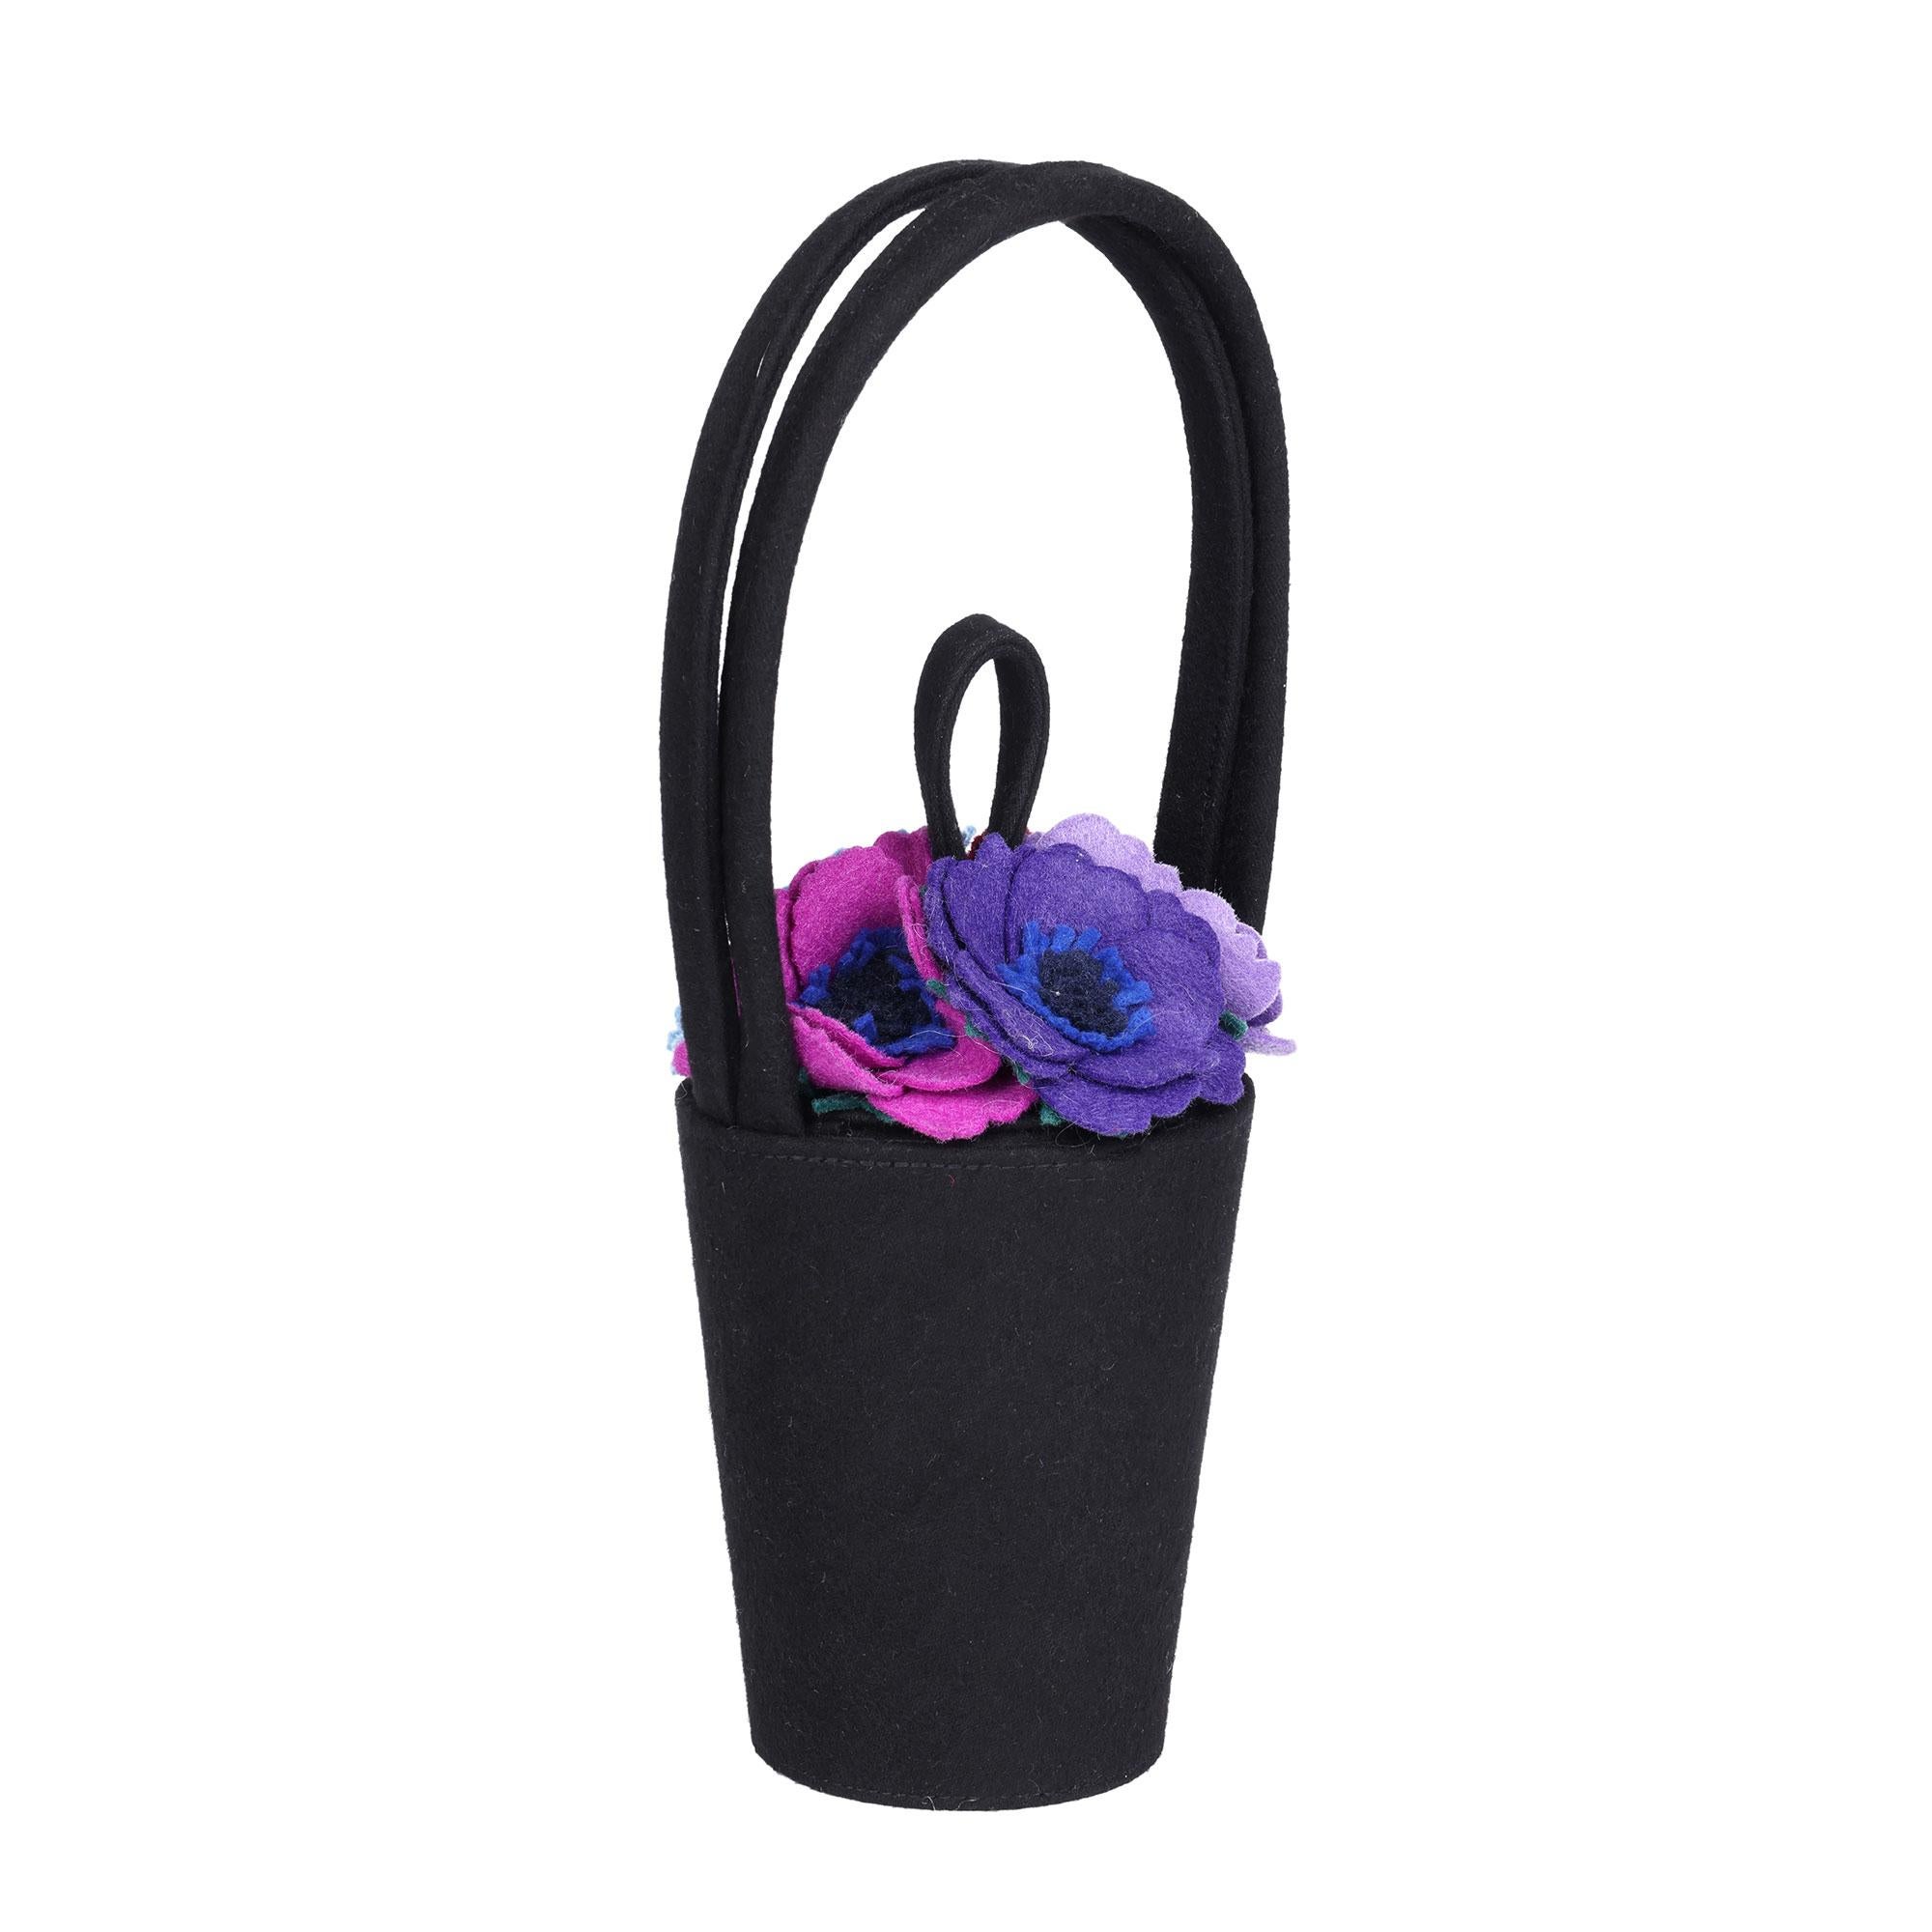 LULU GUINNESS
Black, Pink, Purple, Blue, Green & Red Felt Vintage Baby Florist Pot Bag

Xupes Reference: CWAHF-HB010
Age (Circa): 1990
Authenticity Details: (Made in England)
Gender: Ladies
Type: Top Handle

Colour: Black, Pink, Purple, Blue, Green,